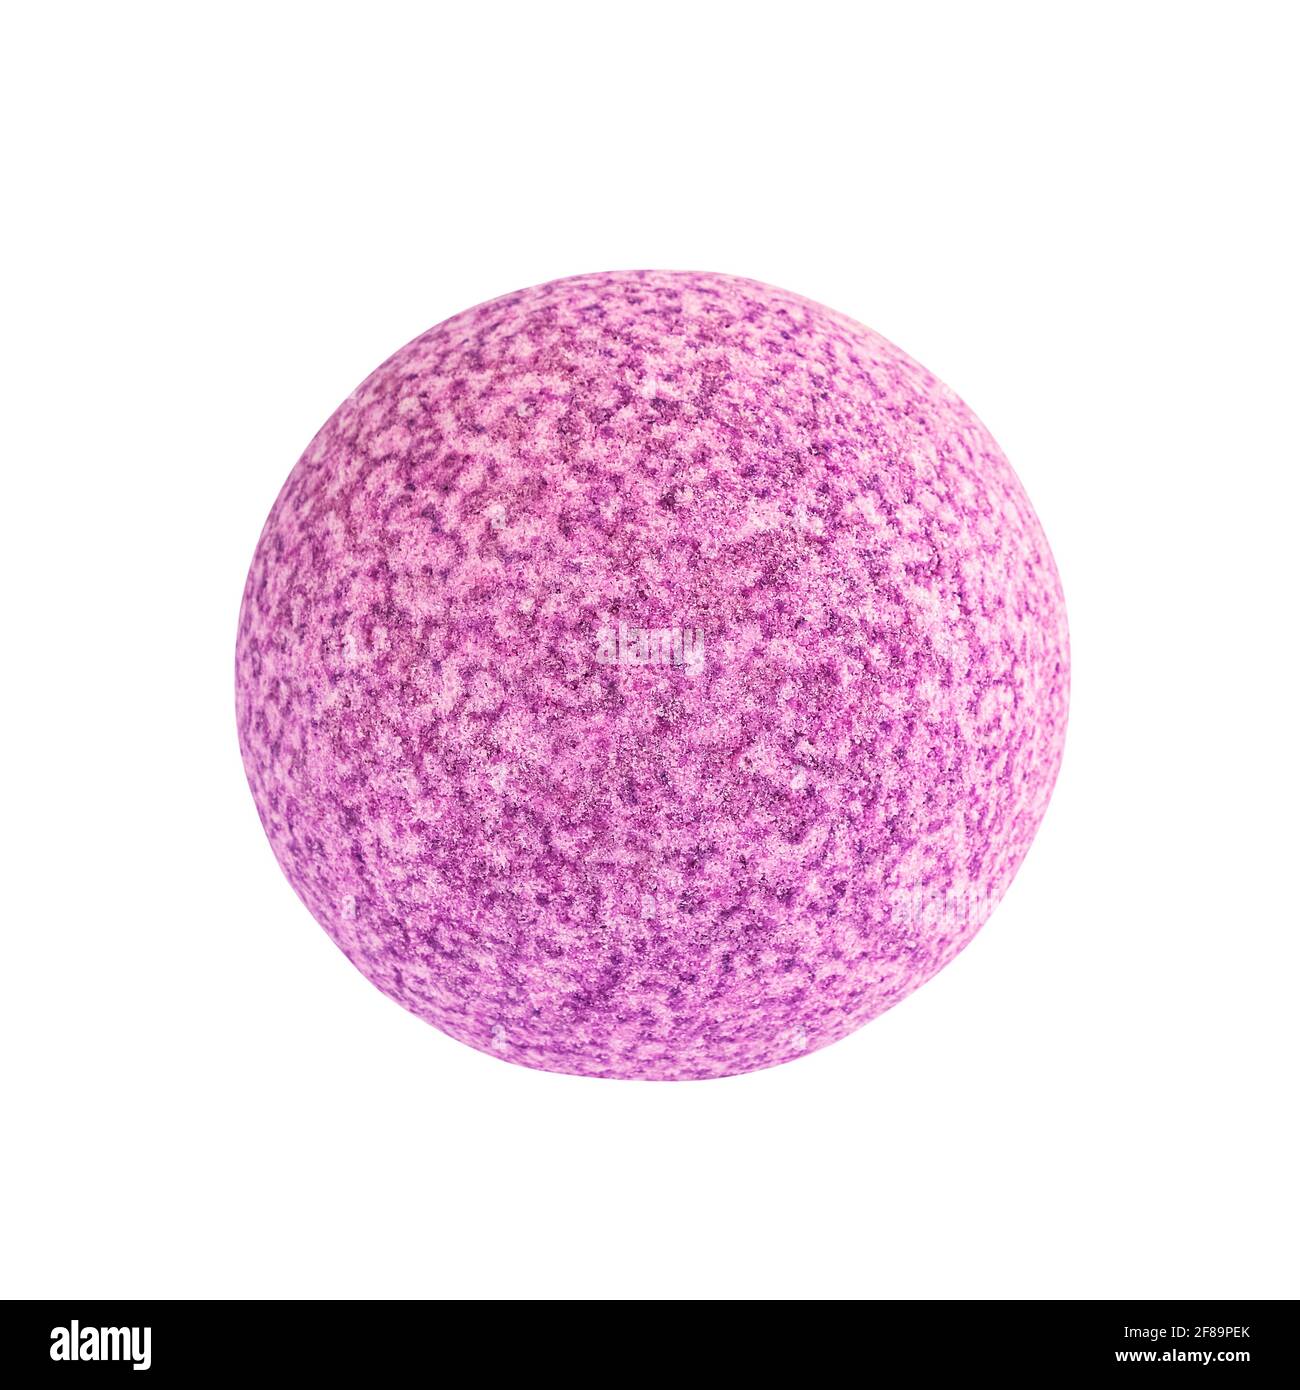 Pink bath bomb, isolated over white background with clipping path Stock Photo